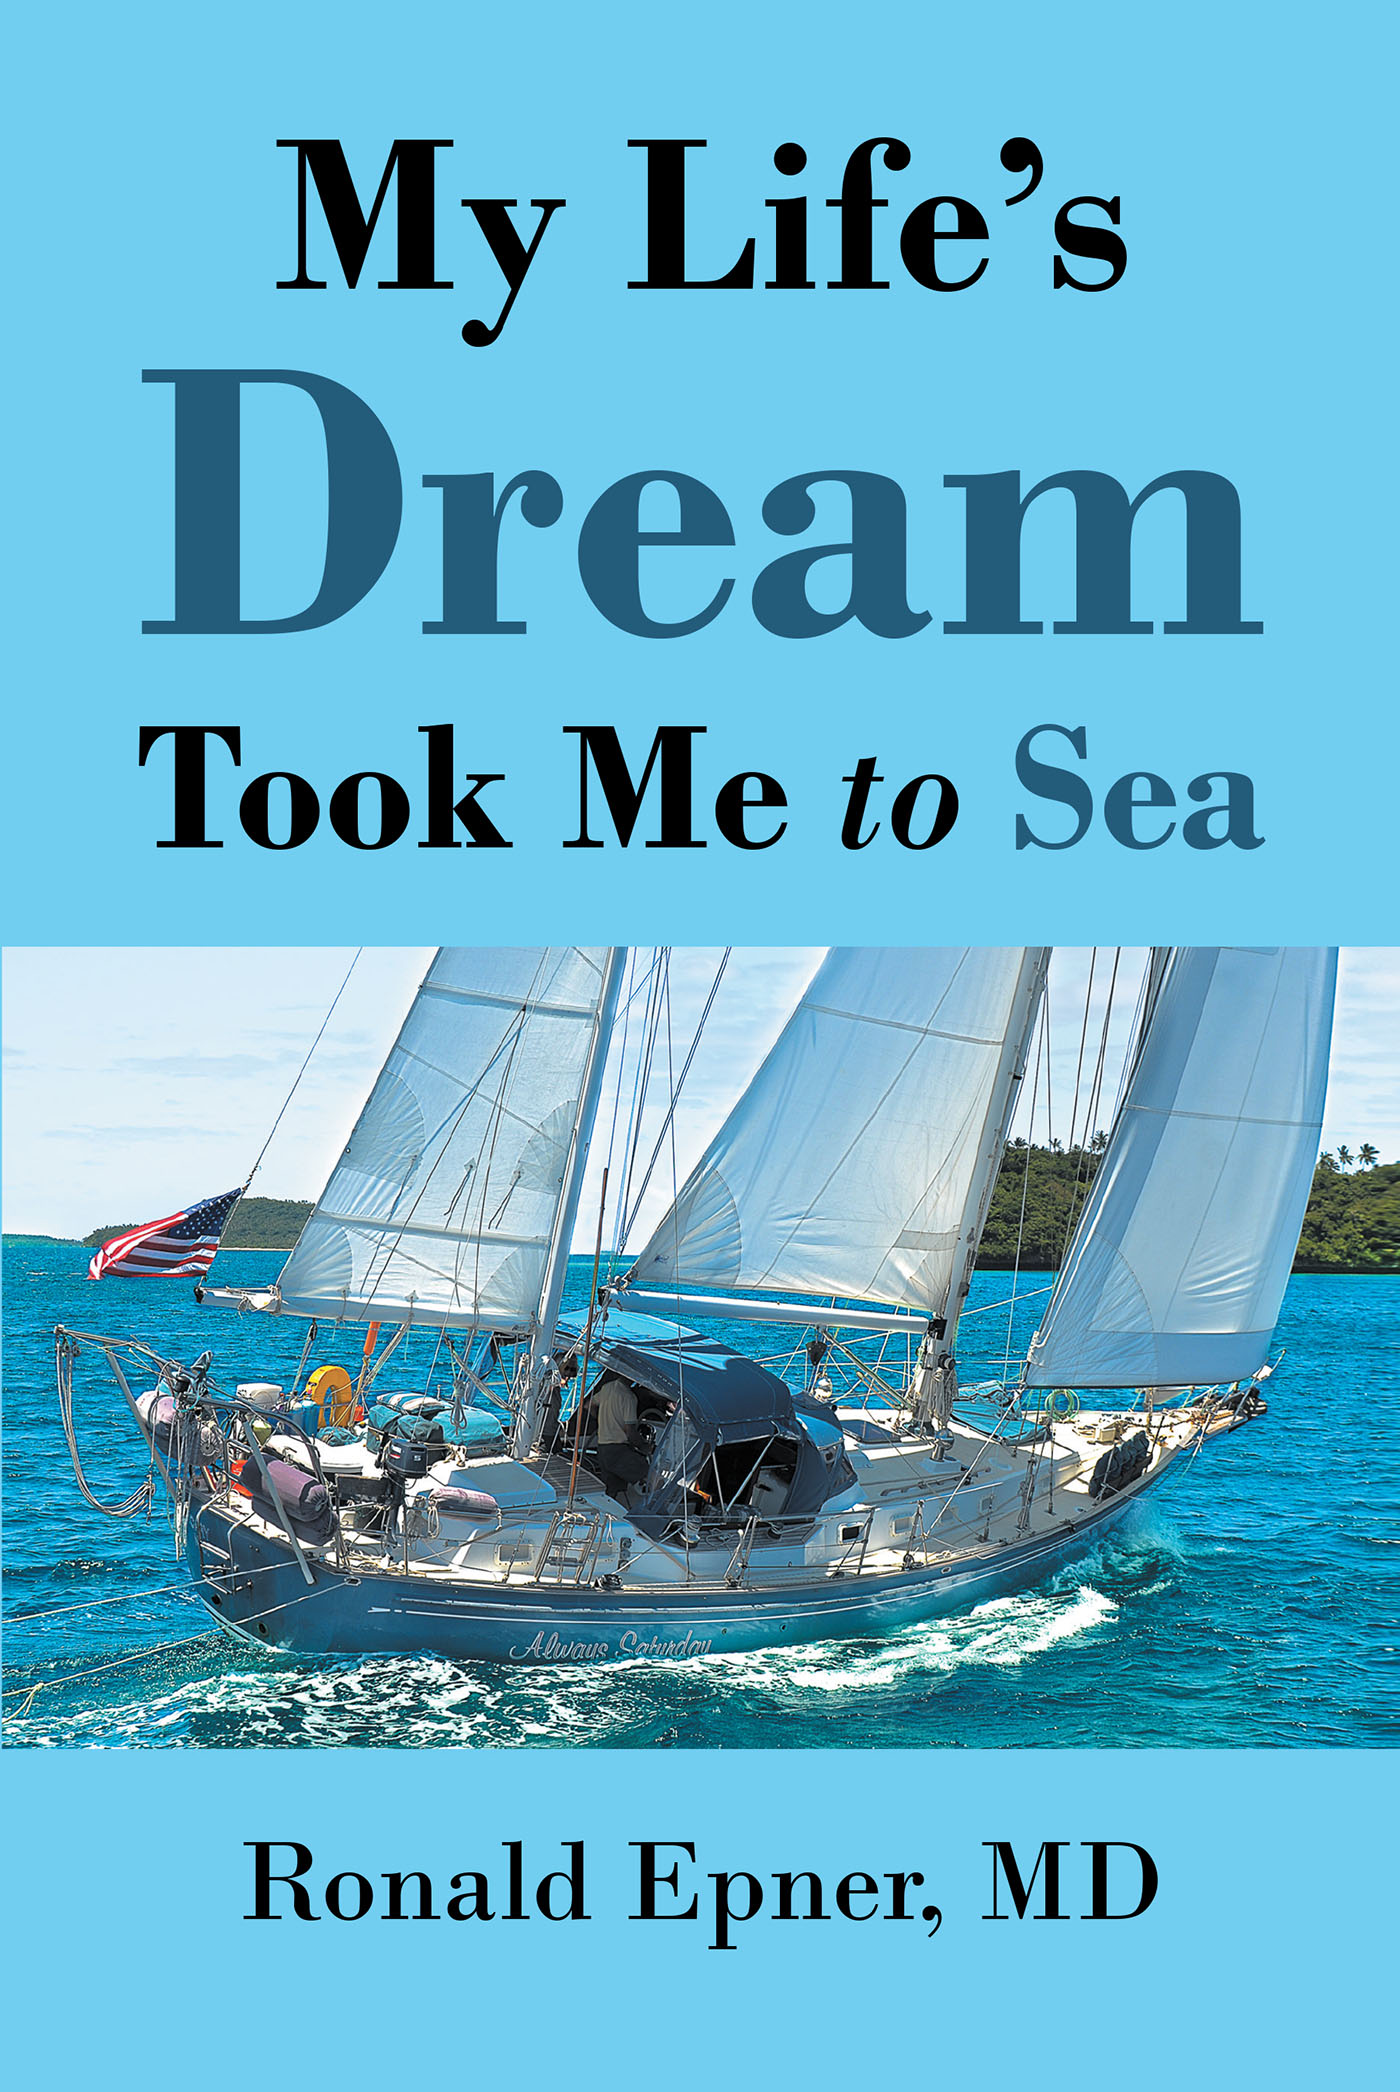 Author Ronald Epner, MD’s New Book, “My Life’s Dream Took Me to Sea,” Shares Invaluable Life Skills That Brought Him a Fulfilled and Meaningful Life